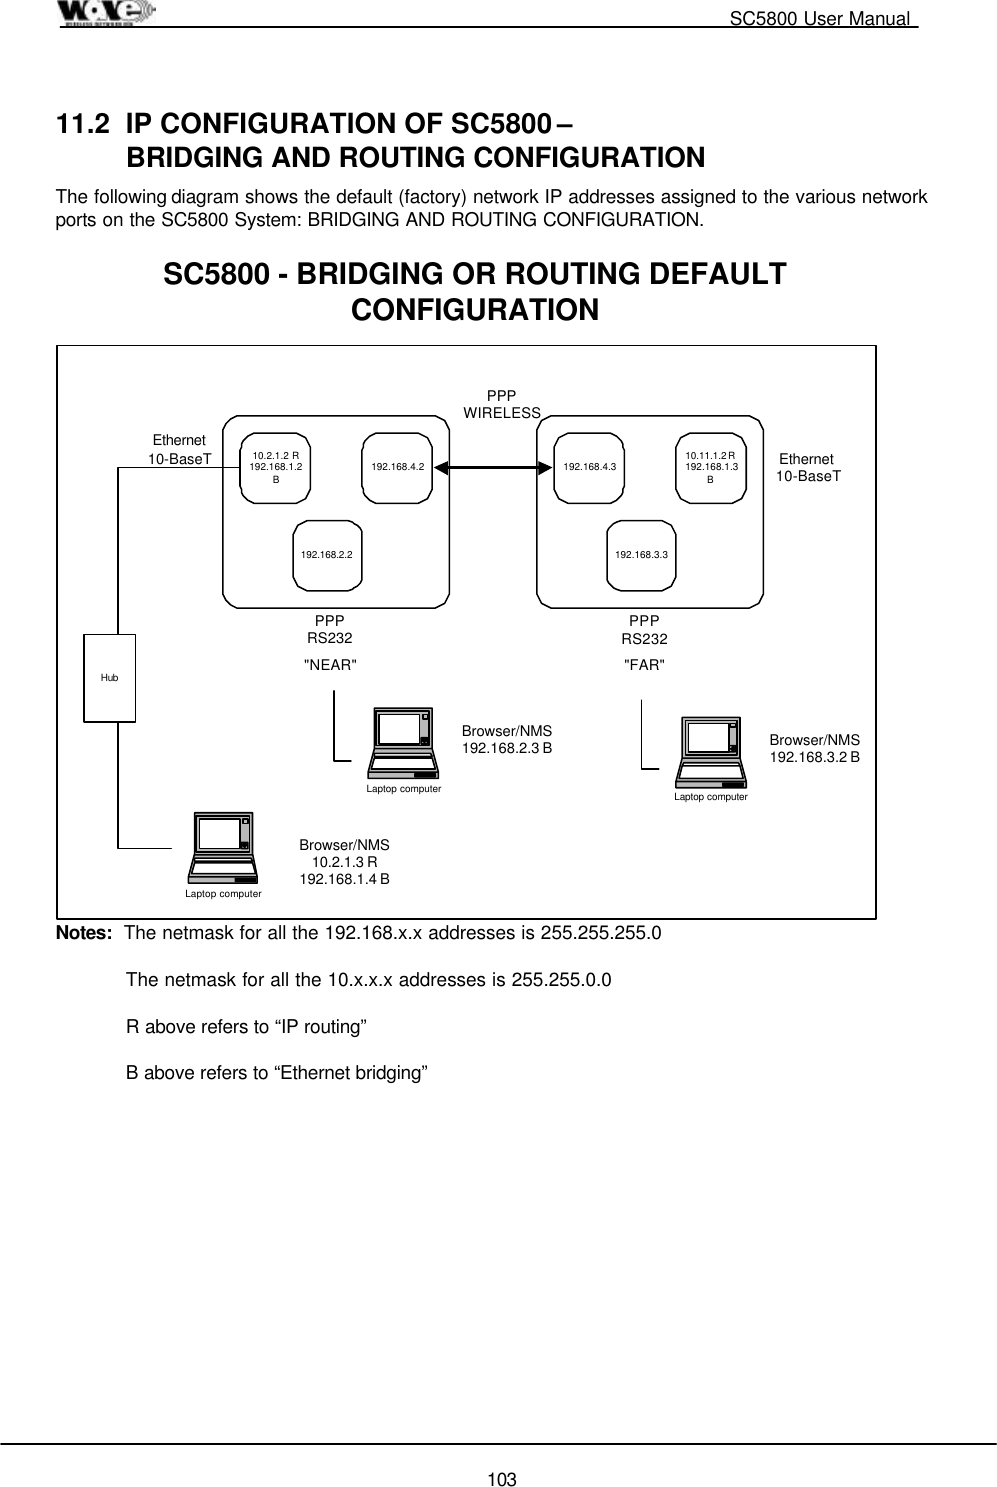                                                                                                   SC5800 User Manual  103 11.2  IP CONFIGURATION OF SC5800 –    BRIDGING AND ROUTING CONFIGURATION The following diagram shows the default (factory) network IP addresses assigned to the various network ports on the SC5800 System: BRIDGING AND ROUTING CONFIGURATION.    10.2.1.2 R192.168.1.2B192.168.4.2192.168.2.2192.168.4.3 10.11.1.2 R192.168.1.3B192.168.3.3Ethernet10-BaseTPPPRS232PPPWIRELESSPPPRS232Ethernet10-BaseT&quot;NEAR&quot; &quot;FAR&quot;Laptop computerBrowser/NMS10.2.1.3 R192.168.1.4 BHubSC5800 - BRIDGING OR ROUTING DEFAULTCONFIGURATIONLaptop computerBrowser/NMS192.168.3.2 BLaptop computerBrowser/NMS192.168.2.3 B Notes:  The netmask for all the 192.168.x.x addresses is 255.255.255.0  The netmask for all the 10.x.x.x addresses is 255.255.0.0  R above refers to “IP routing”  B above refers to “Ethernet bridging” 